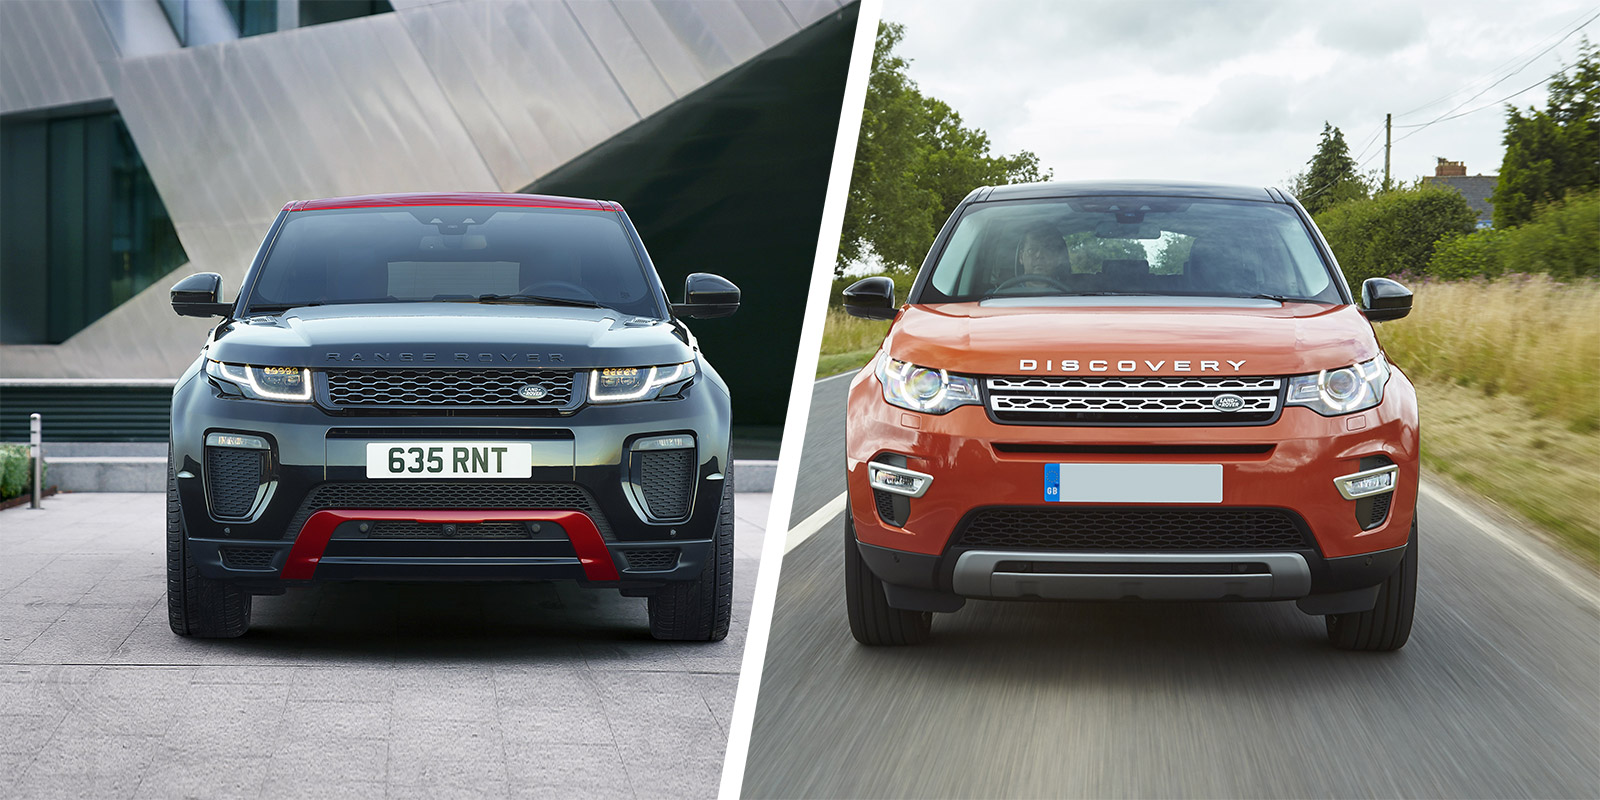 Land Rover Vs. Range Rover: What’s the Difference? | Trust Auto